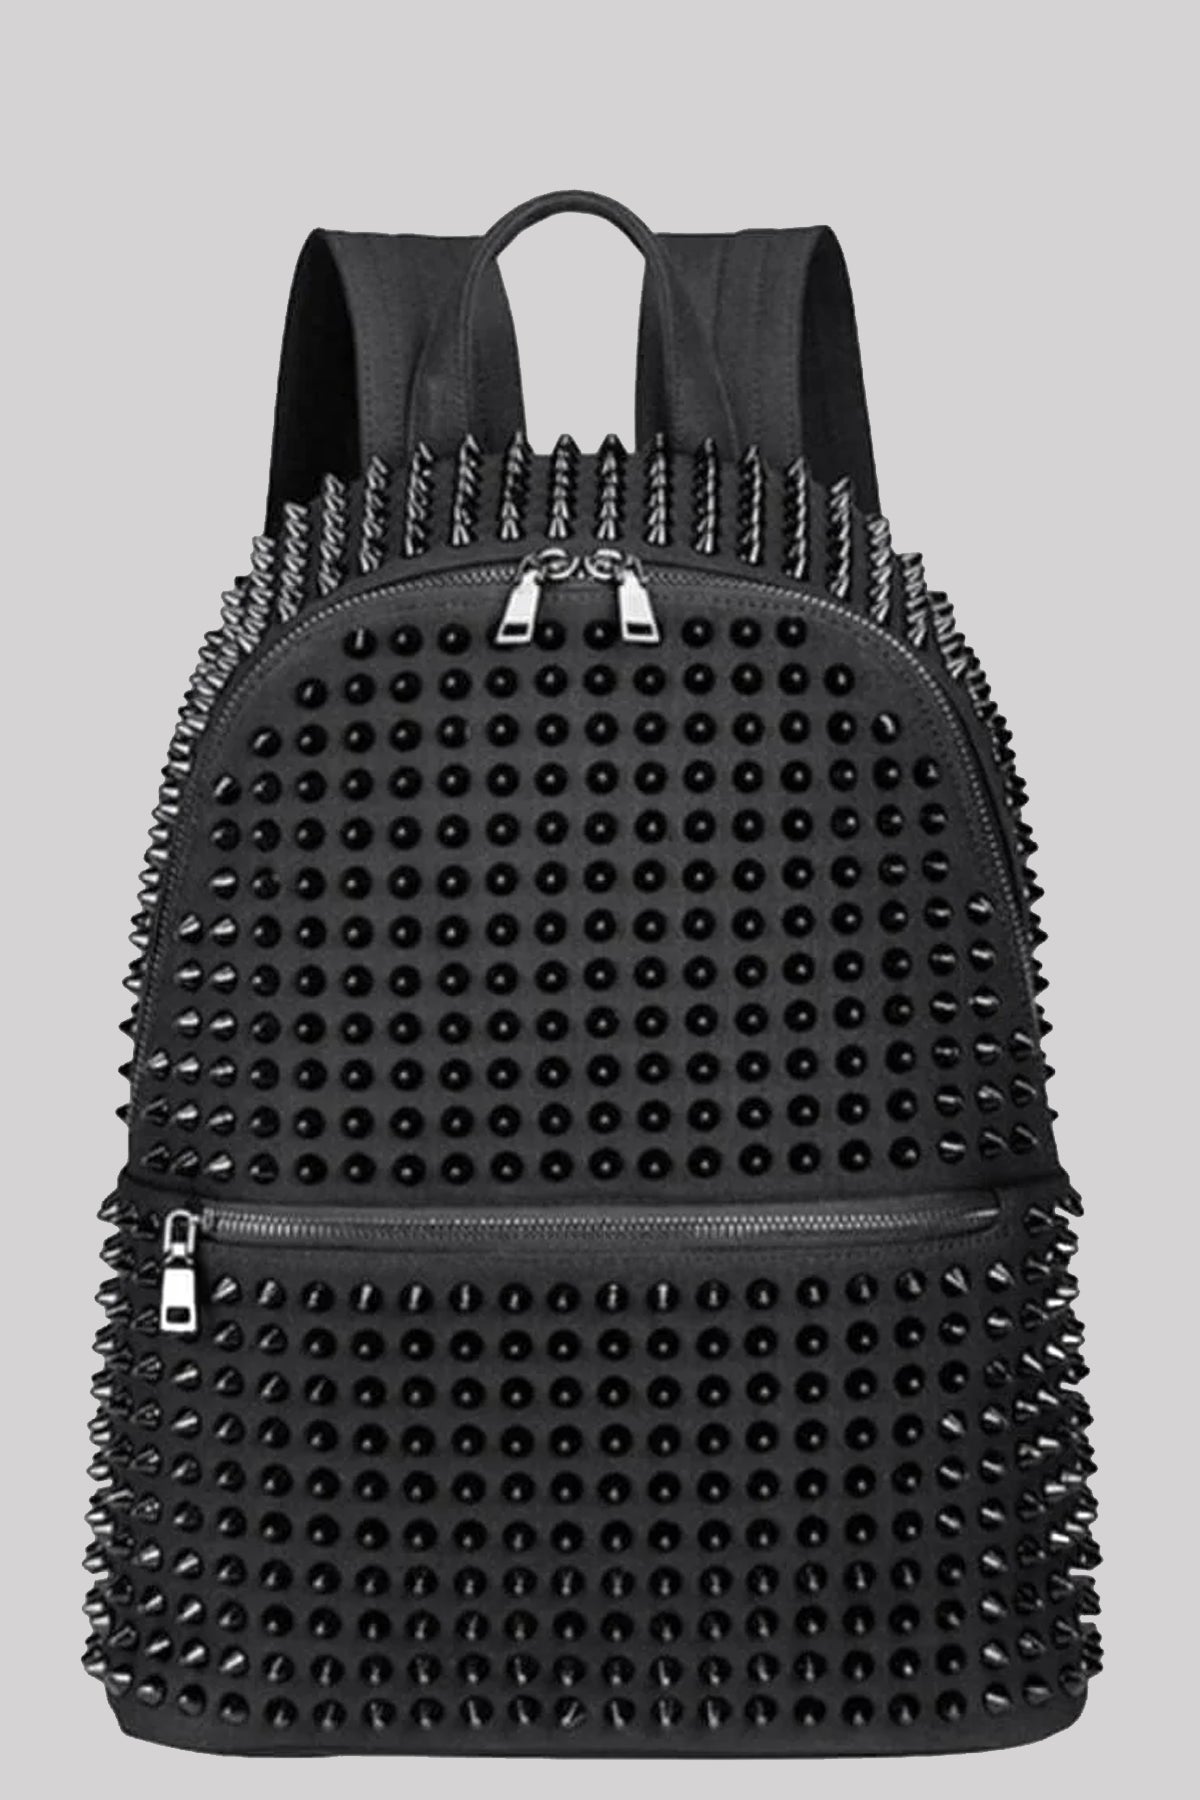 Ro Rox Minerva Studded Canvas Gothic Backpack Bag